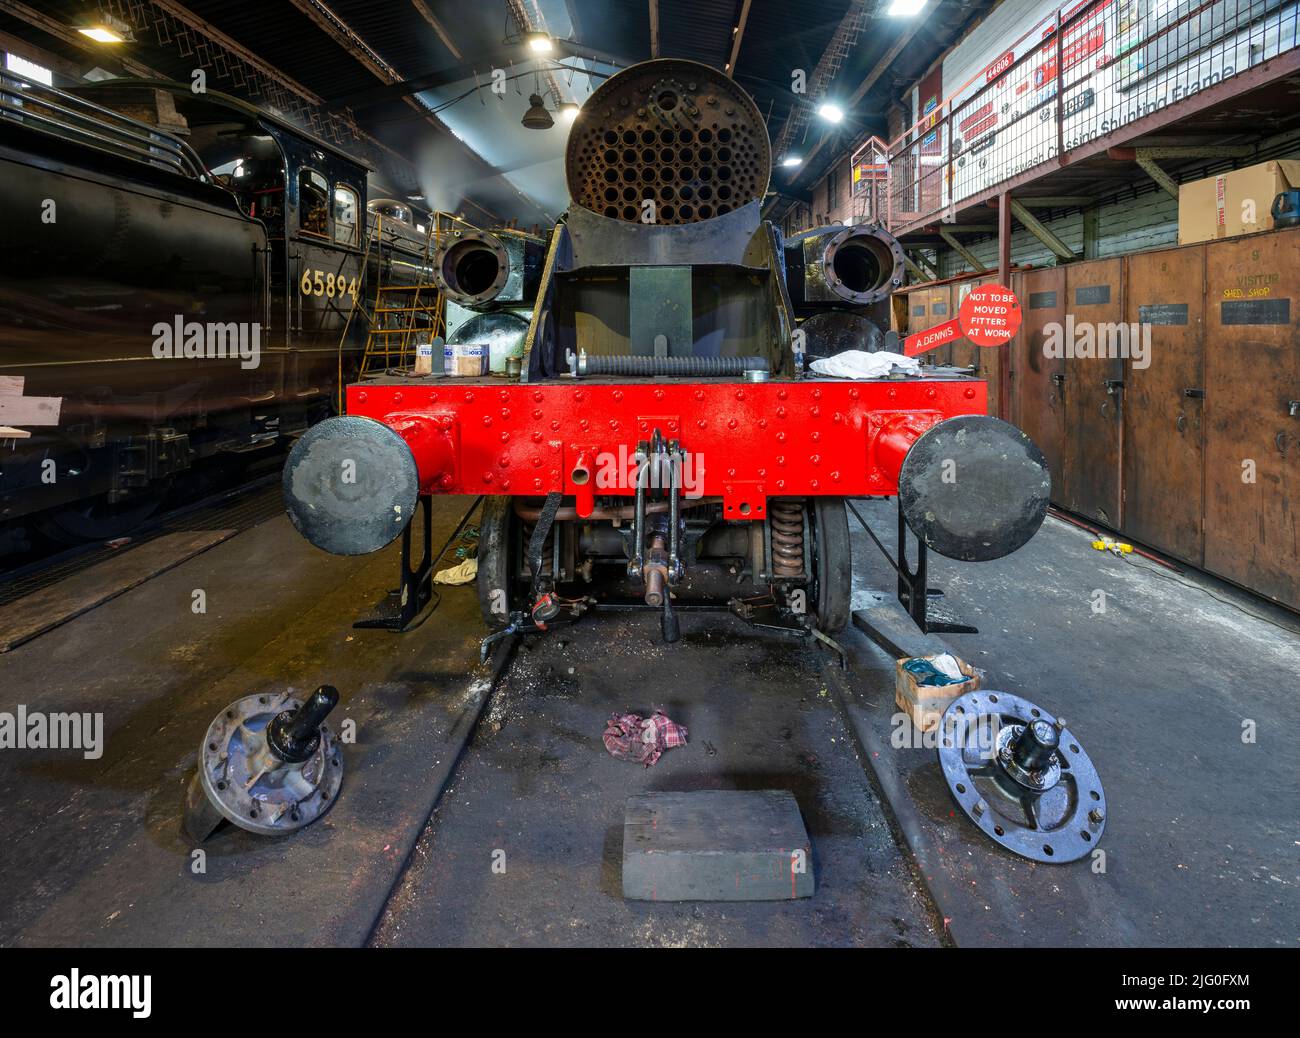 A steam engine undergoing a rebuild in the engine sheds at Grosmont Stock Photo